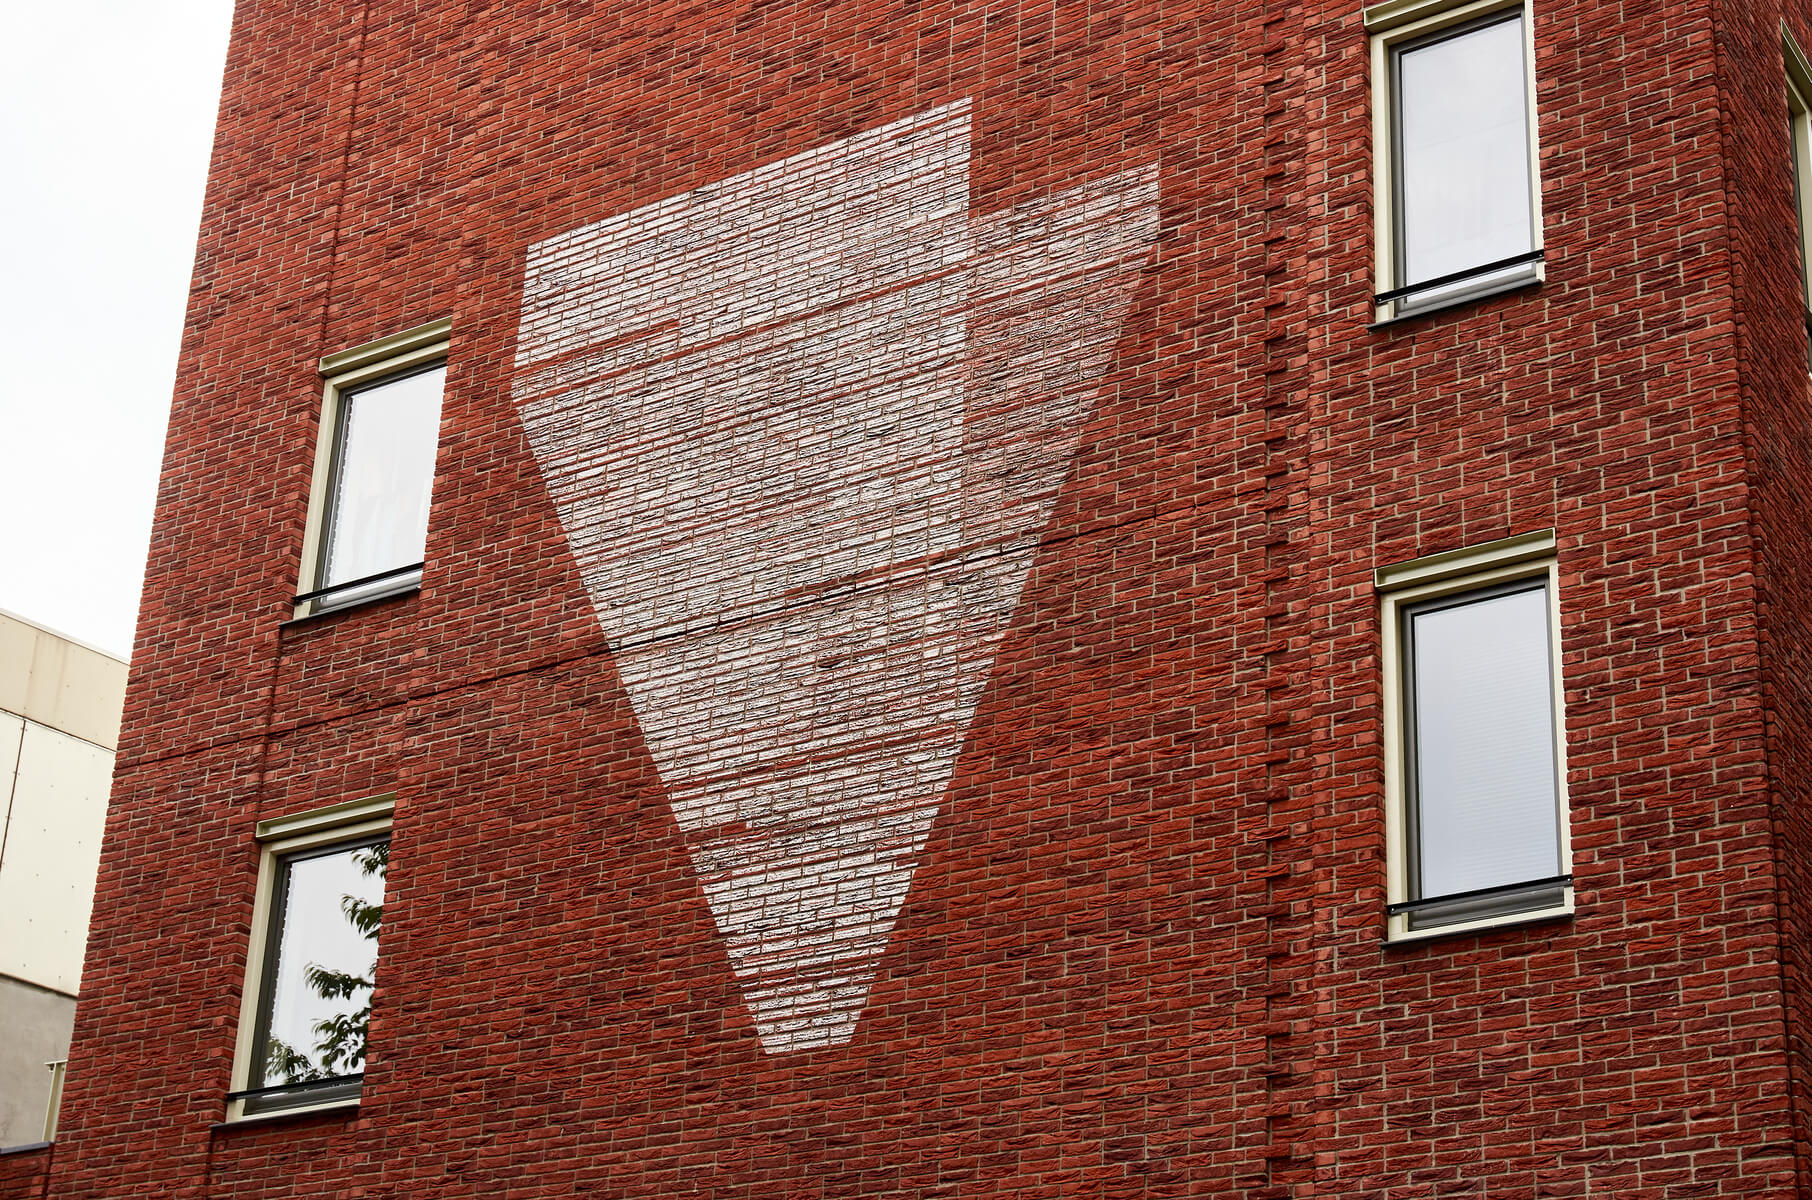 Triangular shaped chalk linedrawing on the brick sidewall of a house, in between 4 windows